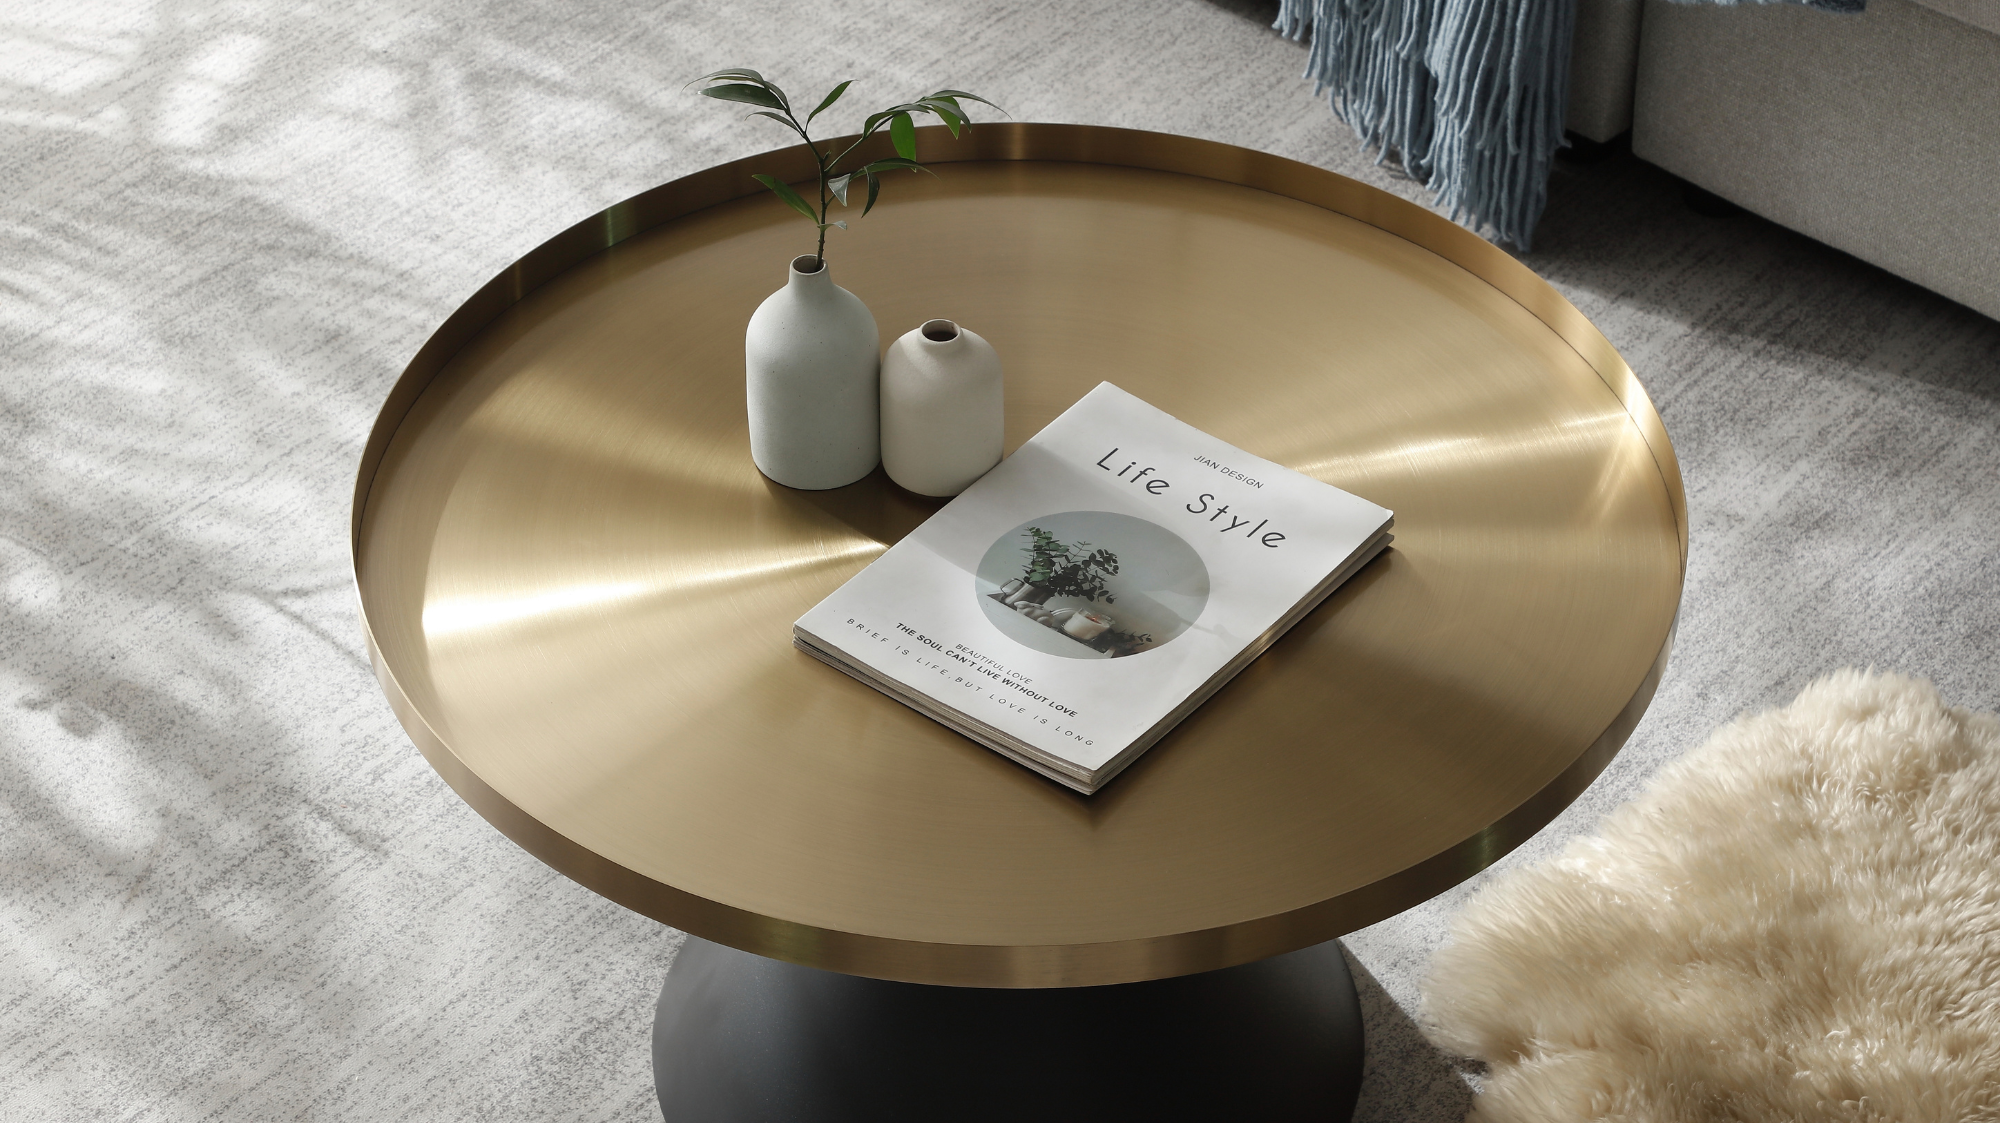 How to Make a Round Coffee Table the Centrepiece of Your Living Space